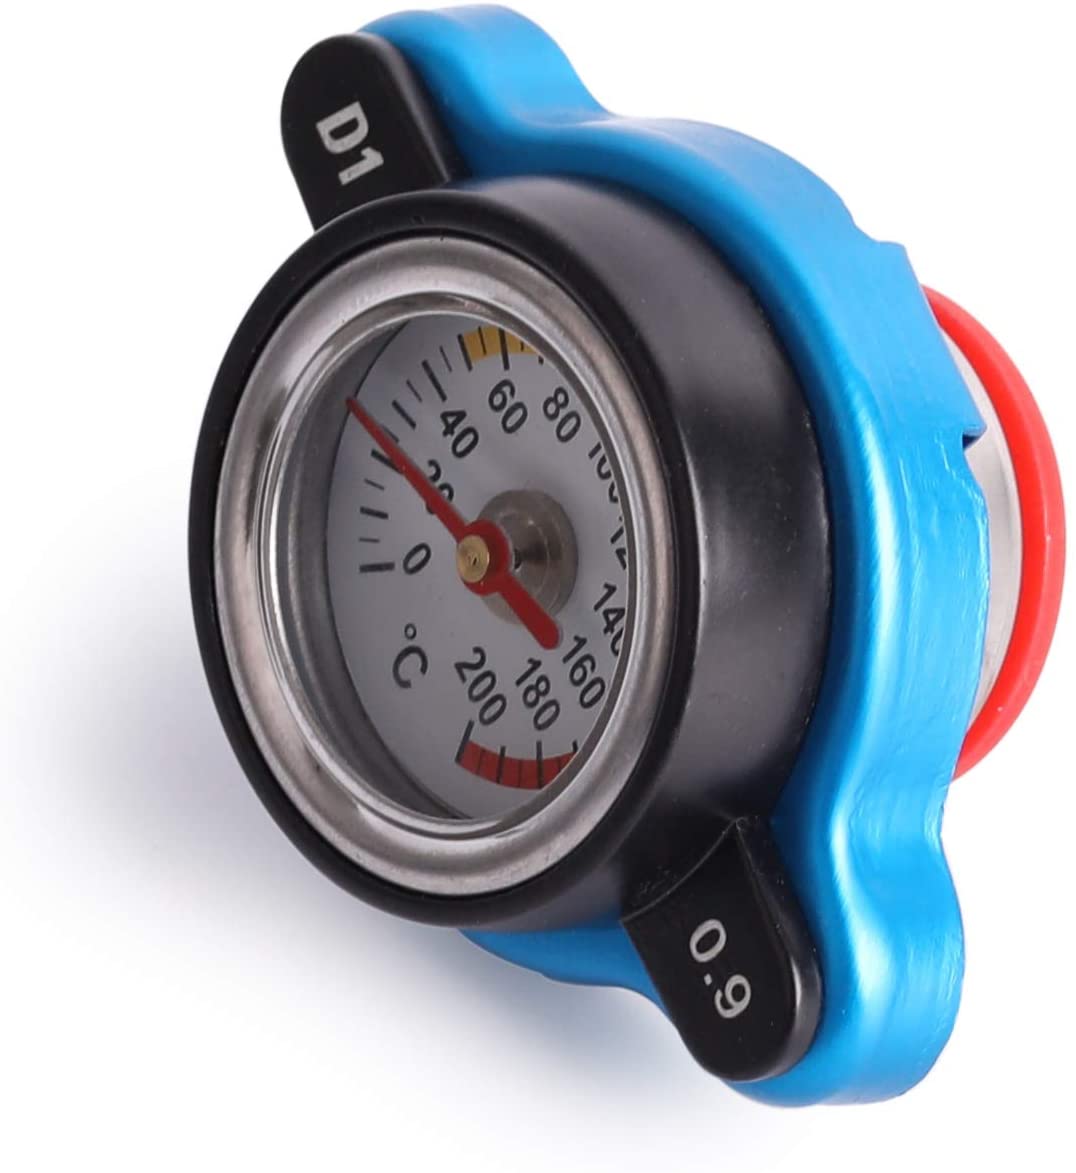 High Pressure Radiator Cap with Temperature Gauge - 0.9 Bar,compatible with16401-63010 1640115210 16401-87710 09045PM3004 D31615205 MB222066 and More